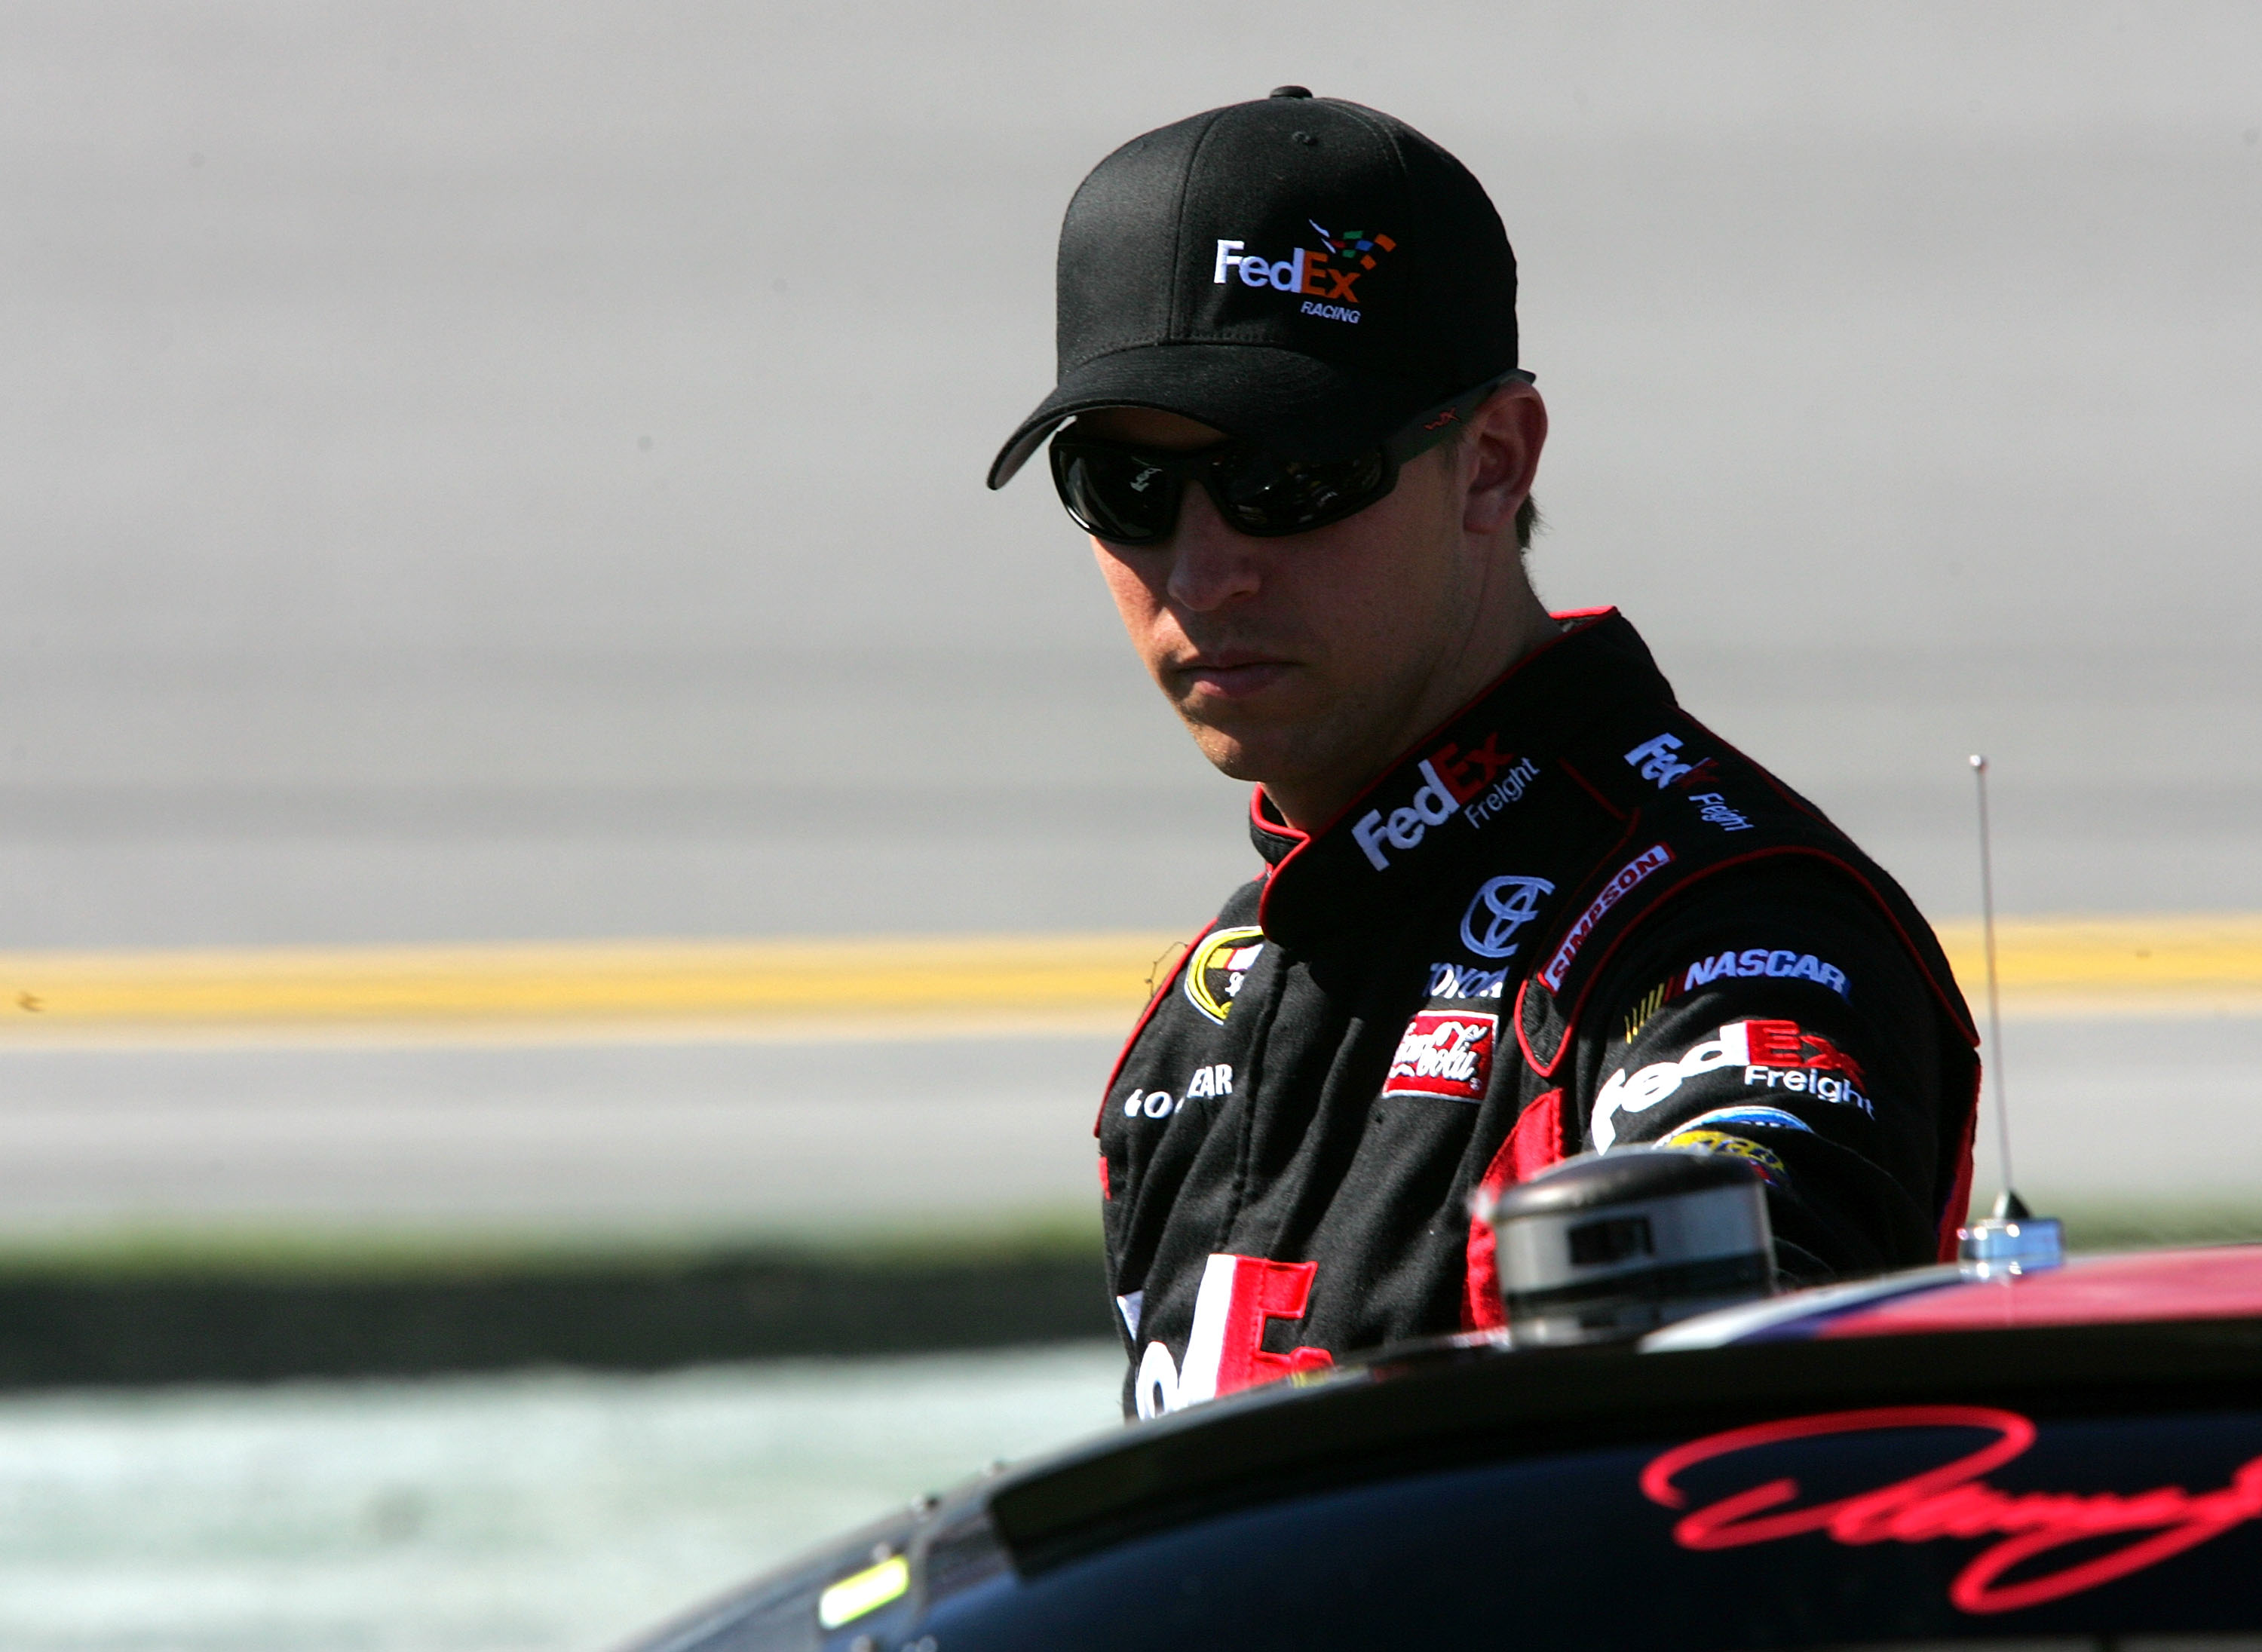 TALLADEGA, AL - OCTOBER 30:  Denny Hamlin, driver of the #11 FedEx Freight Toyota, walks on pit road during qualifying for the NASCAR Sprint Cup Series AMP Energy Juice 500 at Talladega Superspeedway on October 30, 2010 in Talladega, Alabama.  (Photo by J